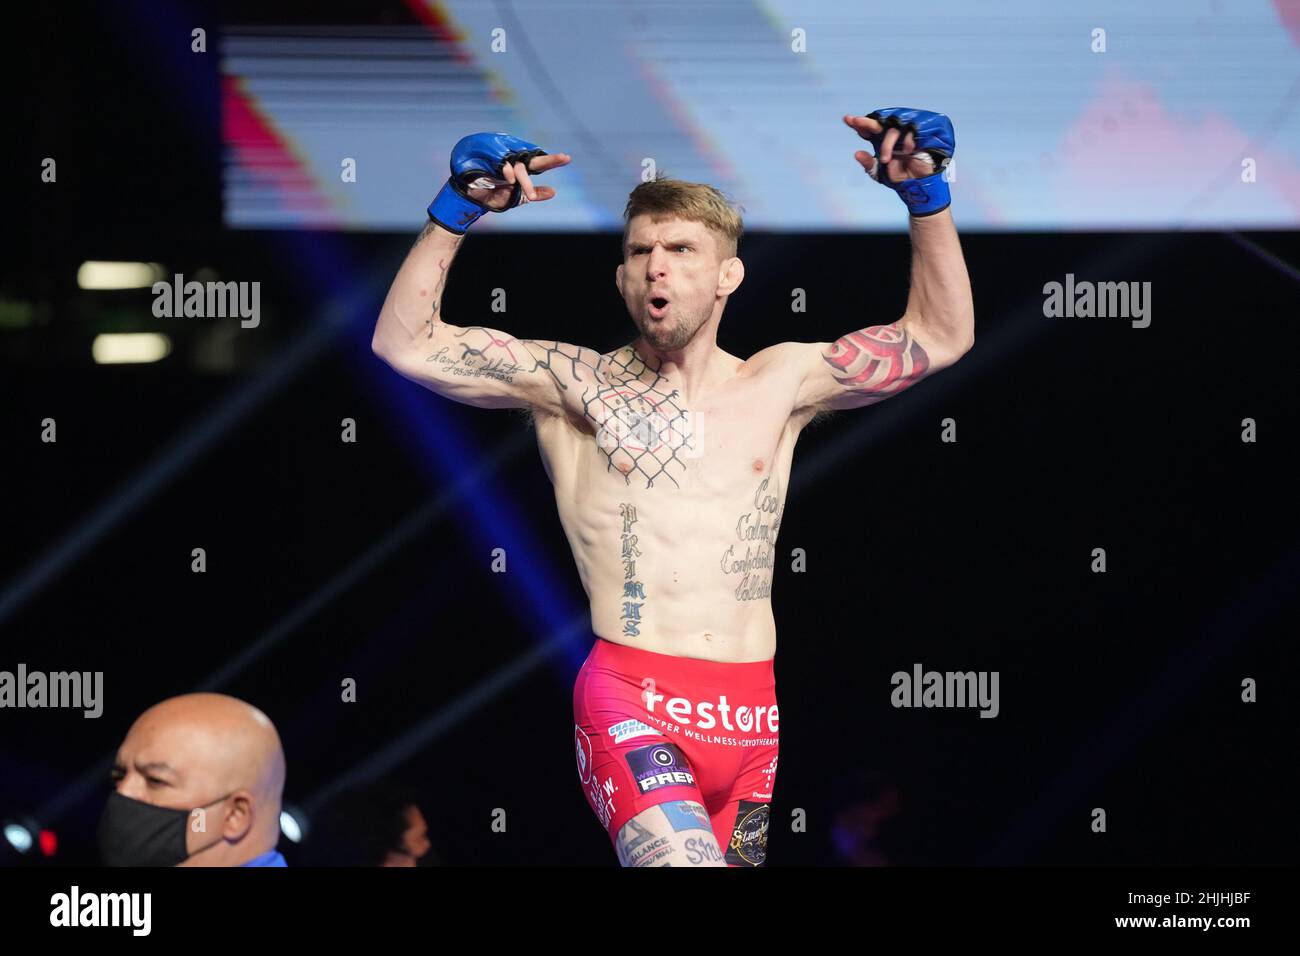 PHOENIX, AZ - JANUARY 29: Blaine Shutt prepares to fight Nikita Mikhailov in their bantamweight fight during the Bellator 273: Bader v Moldavsky event at Footprint Center,  on January 29, 2022 in Phoenix, AZ, United States. (Photo by Louis Grasse/PxImages) Stock Photo